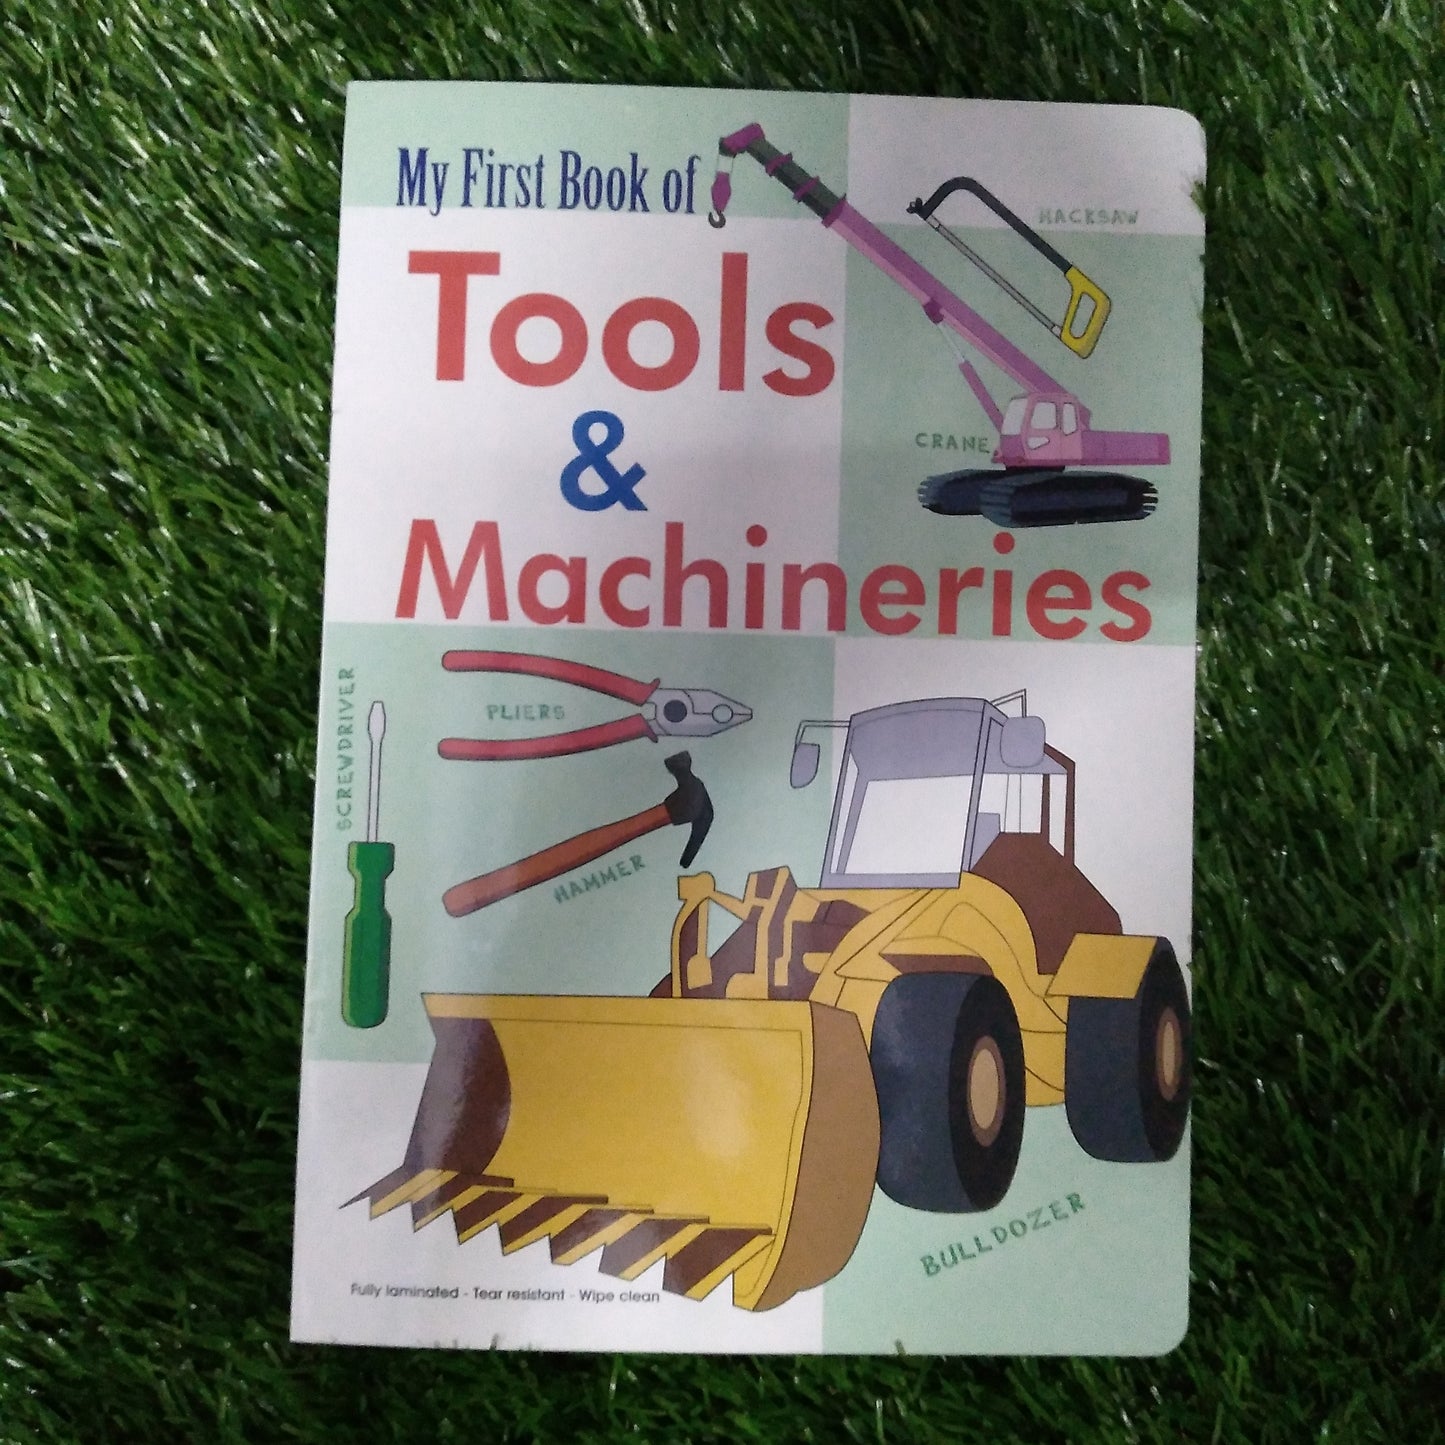 My Book of Tools and Machineries